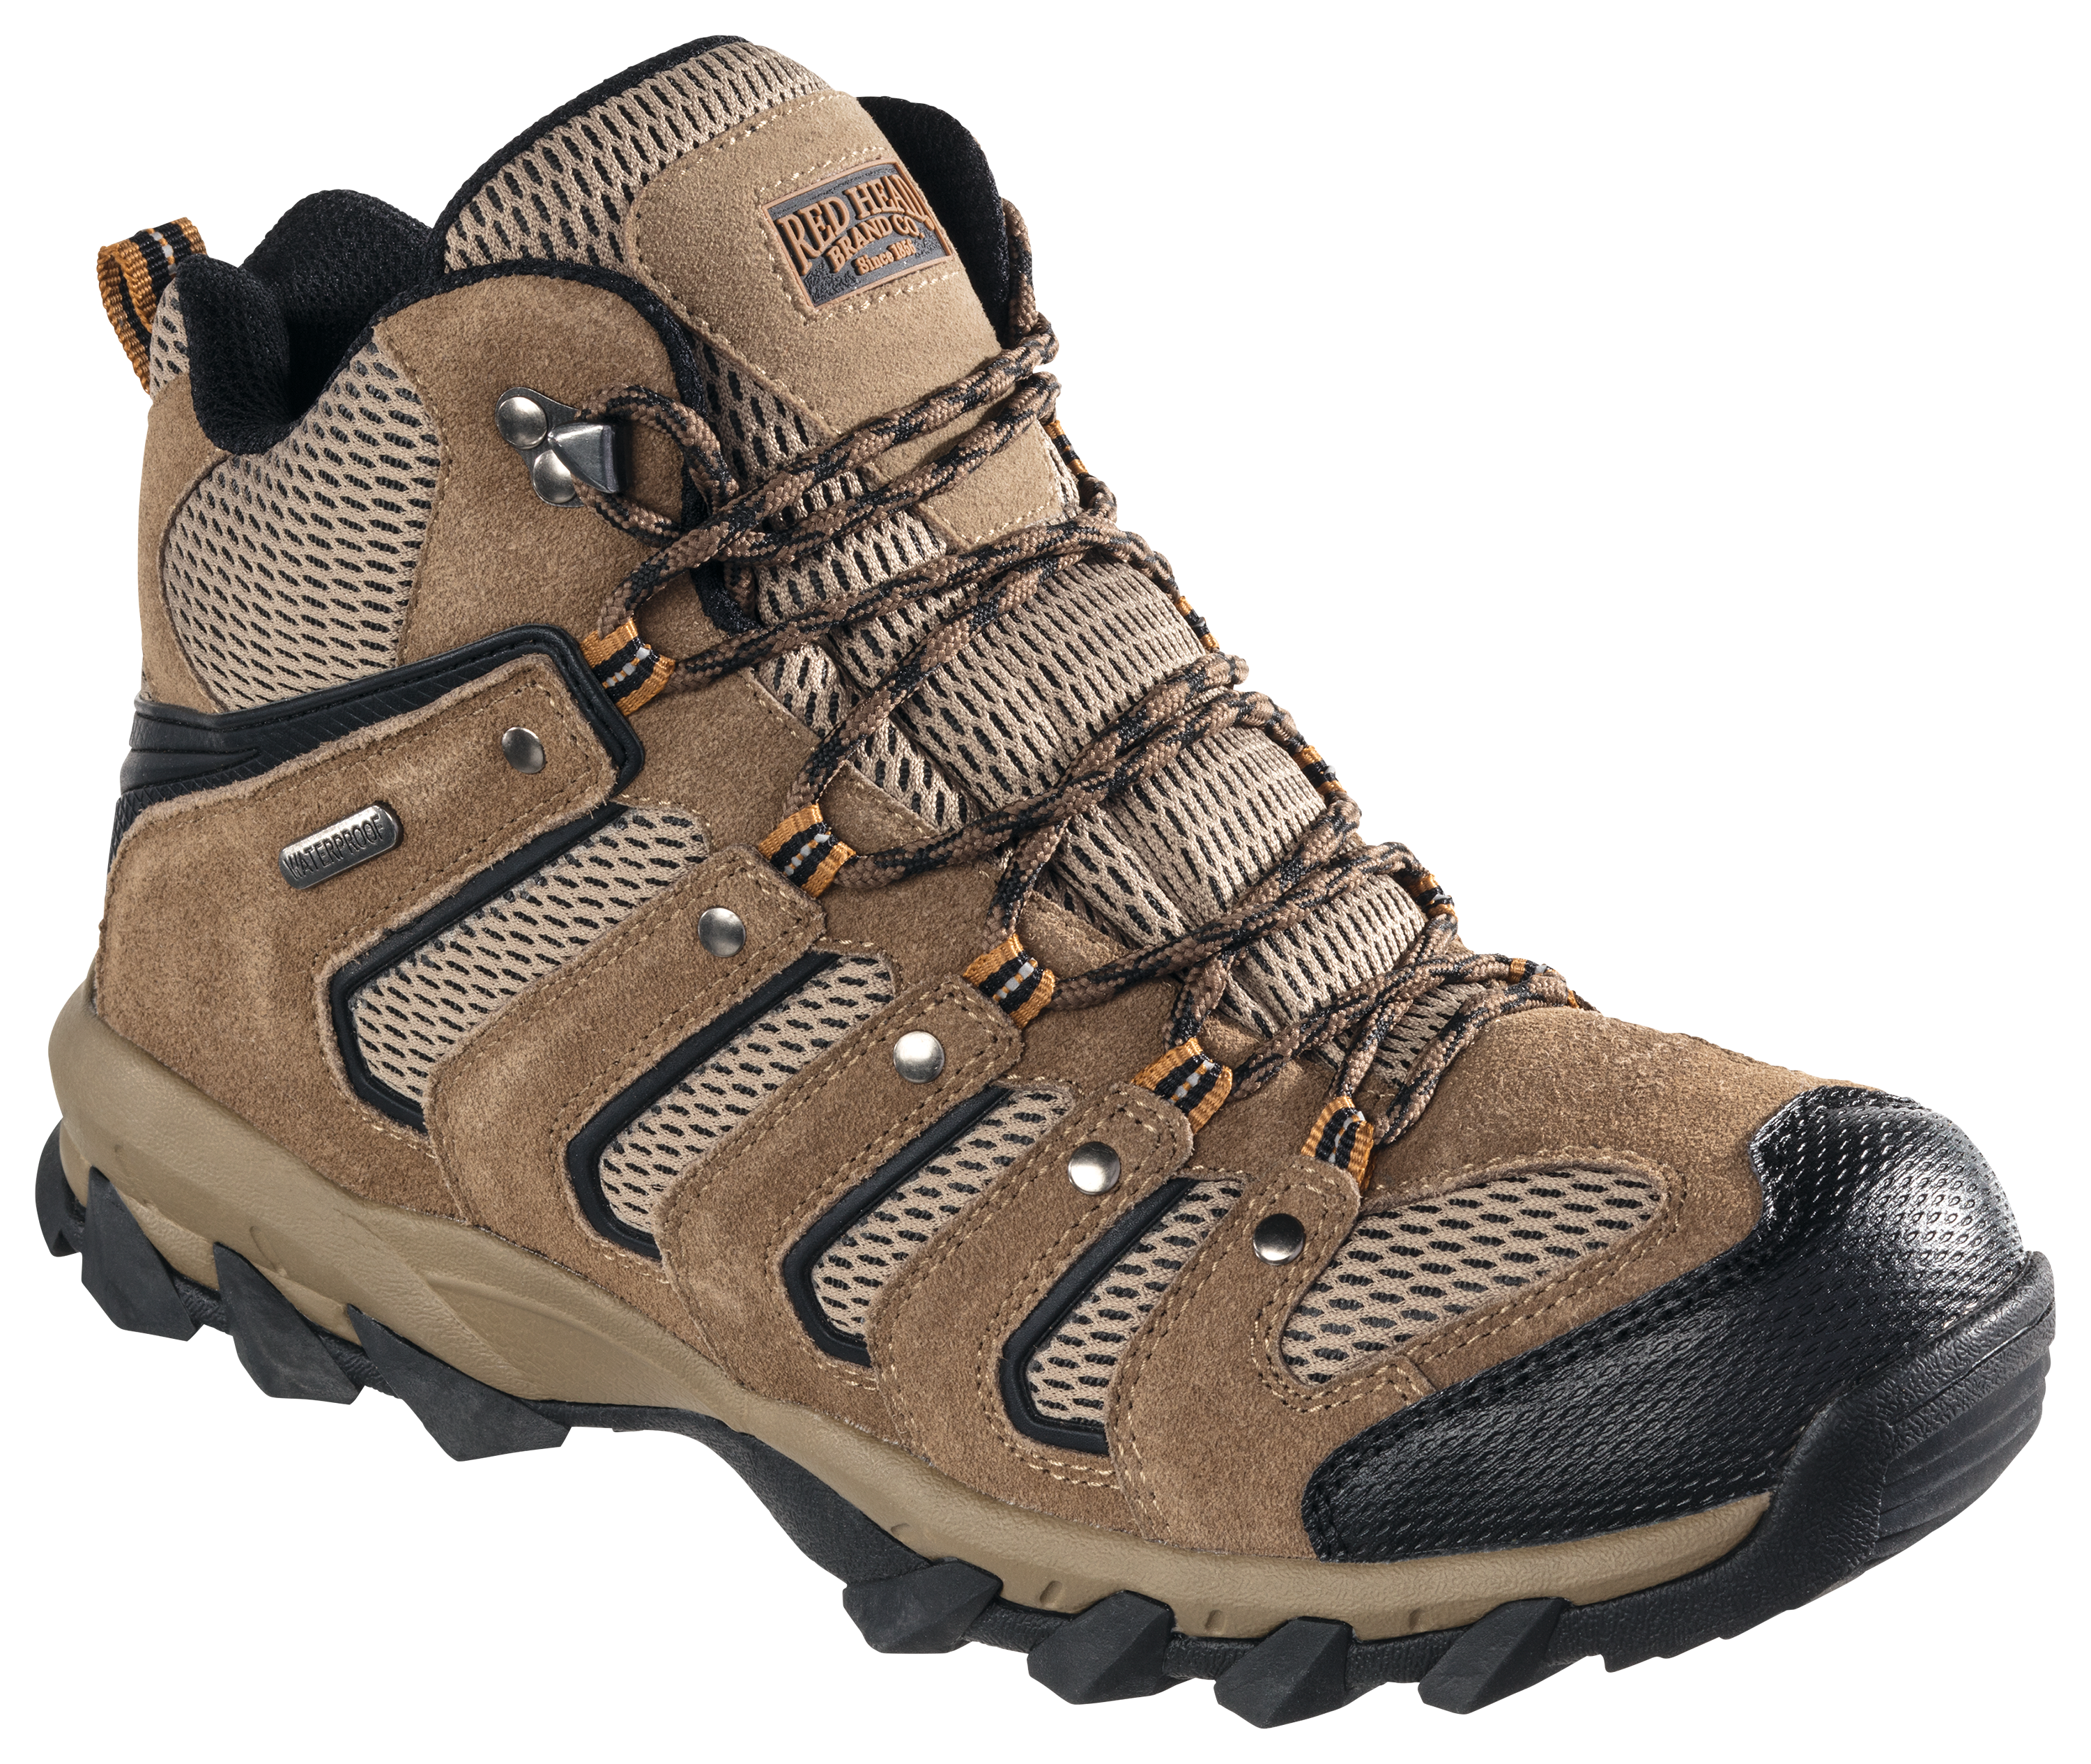 RedHead Front Range Hiking Boots for Men - Brown - 10.5M